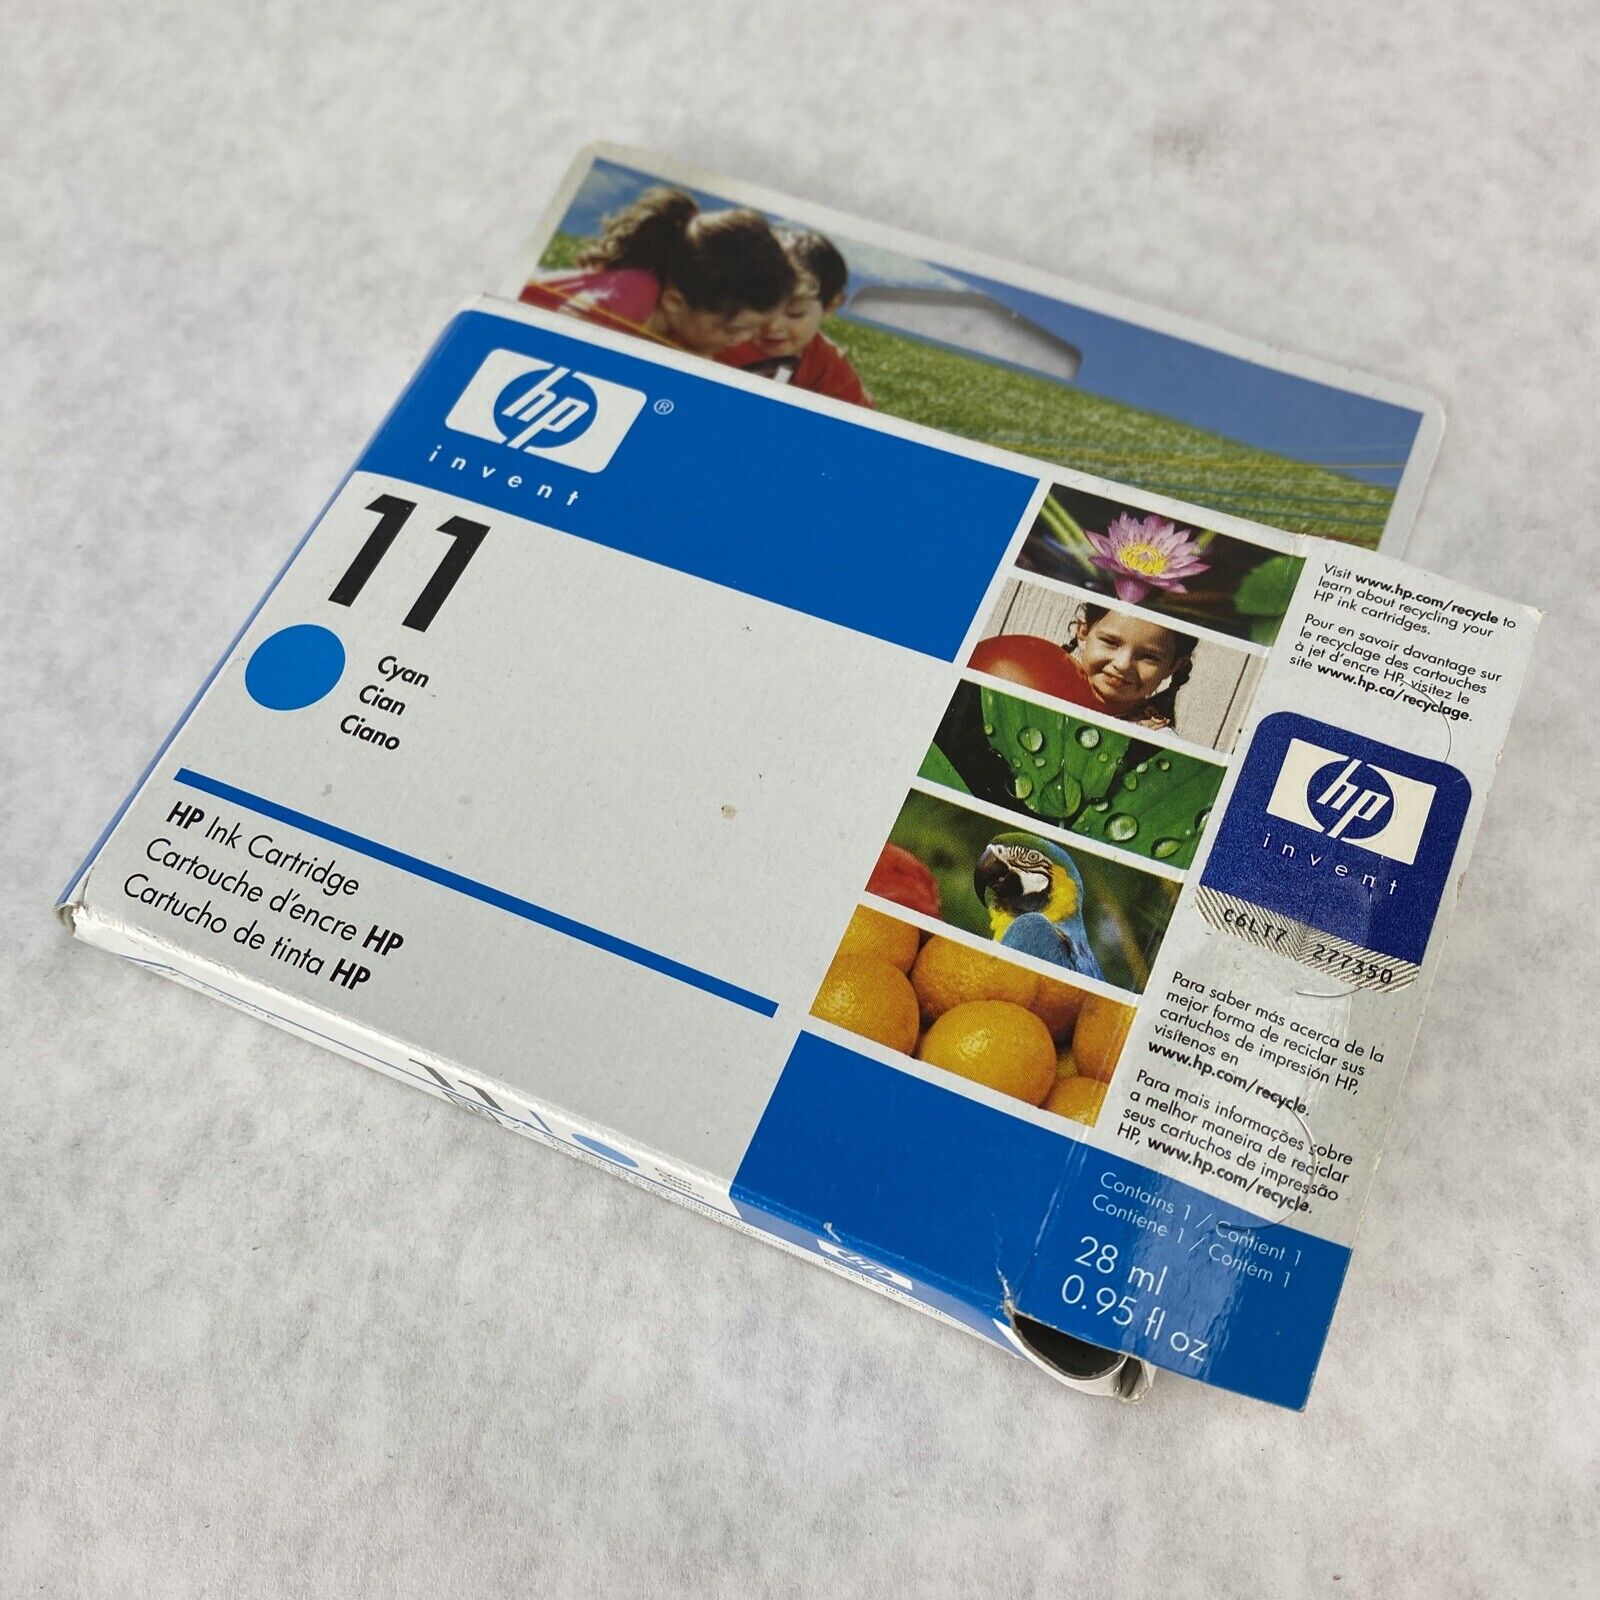 Lot( 2 ) HP 11 Cyan C4836A Ink Cartridge SEALED Expired 2008 + 2010